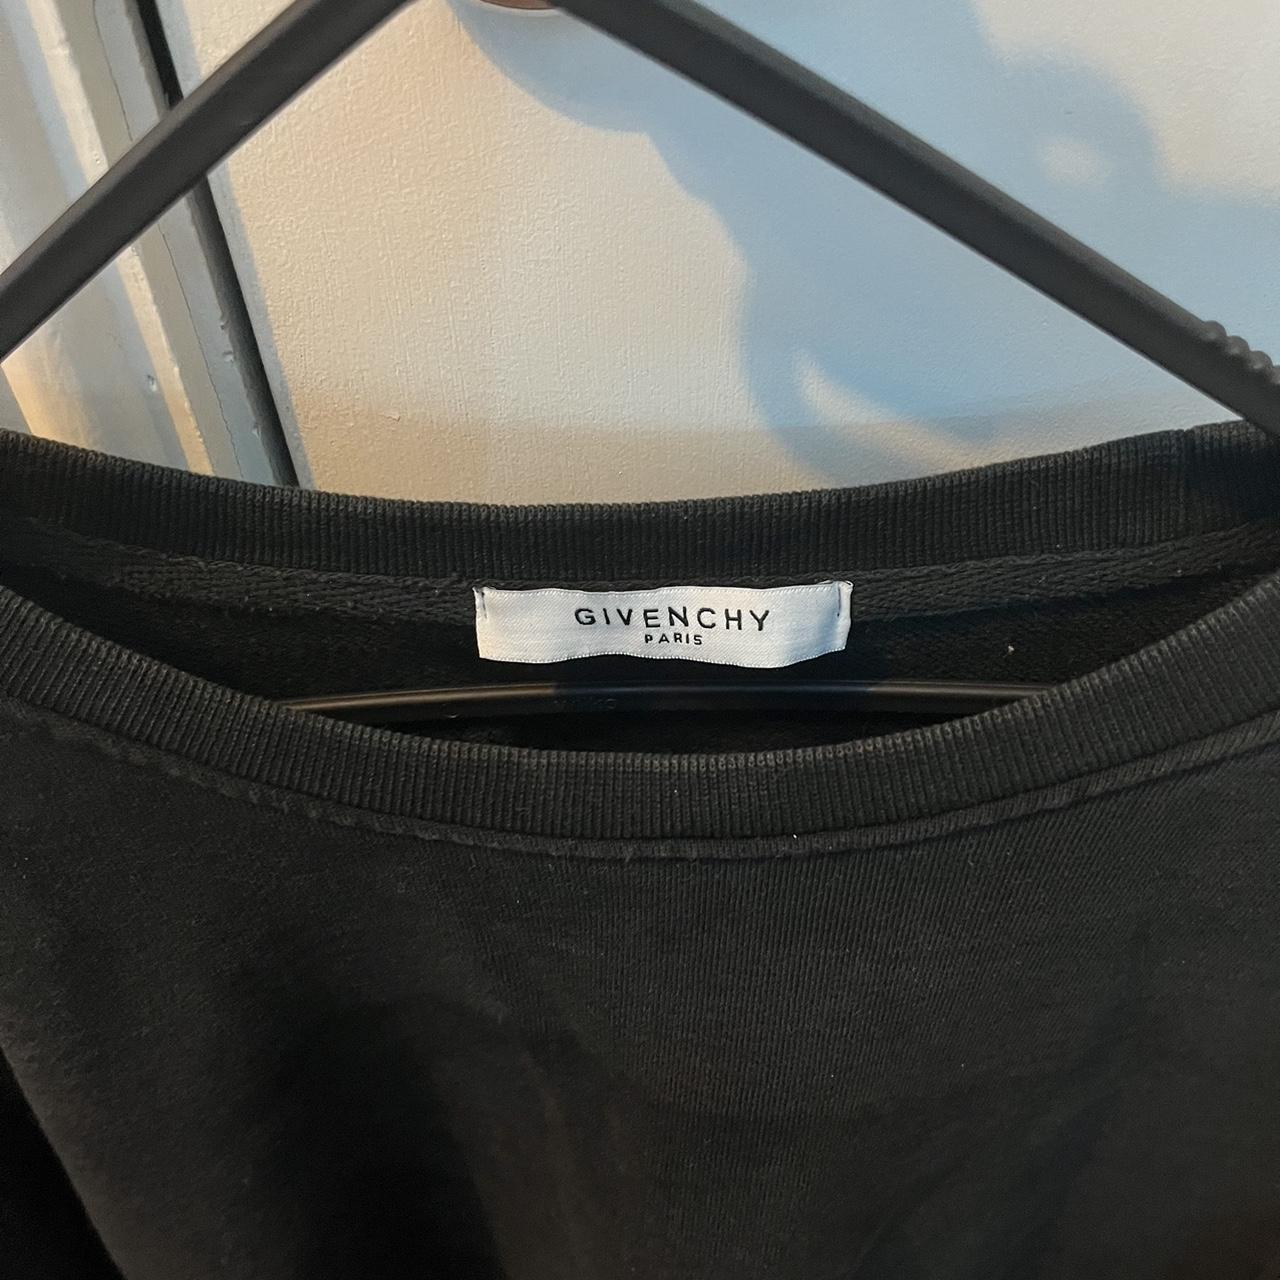 Givenchy crewneck hoodie - black with classic... - Depop